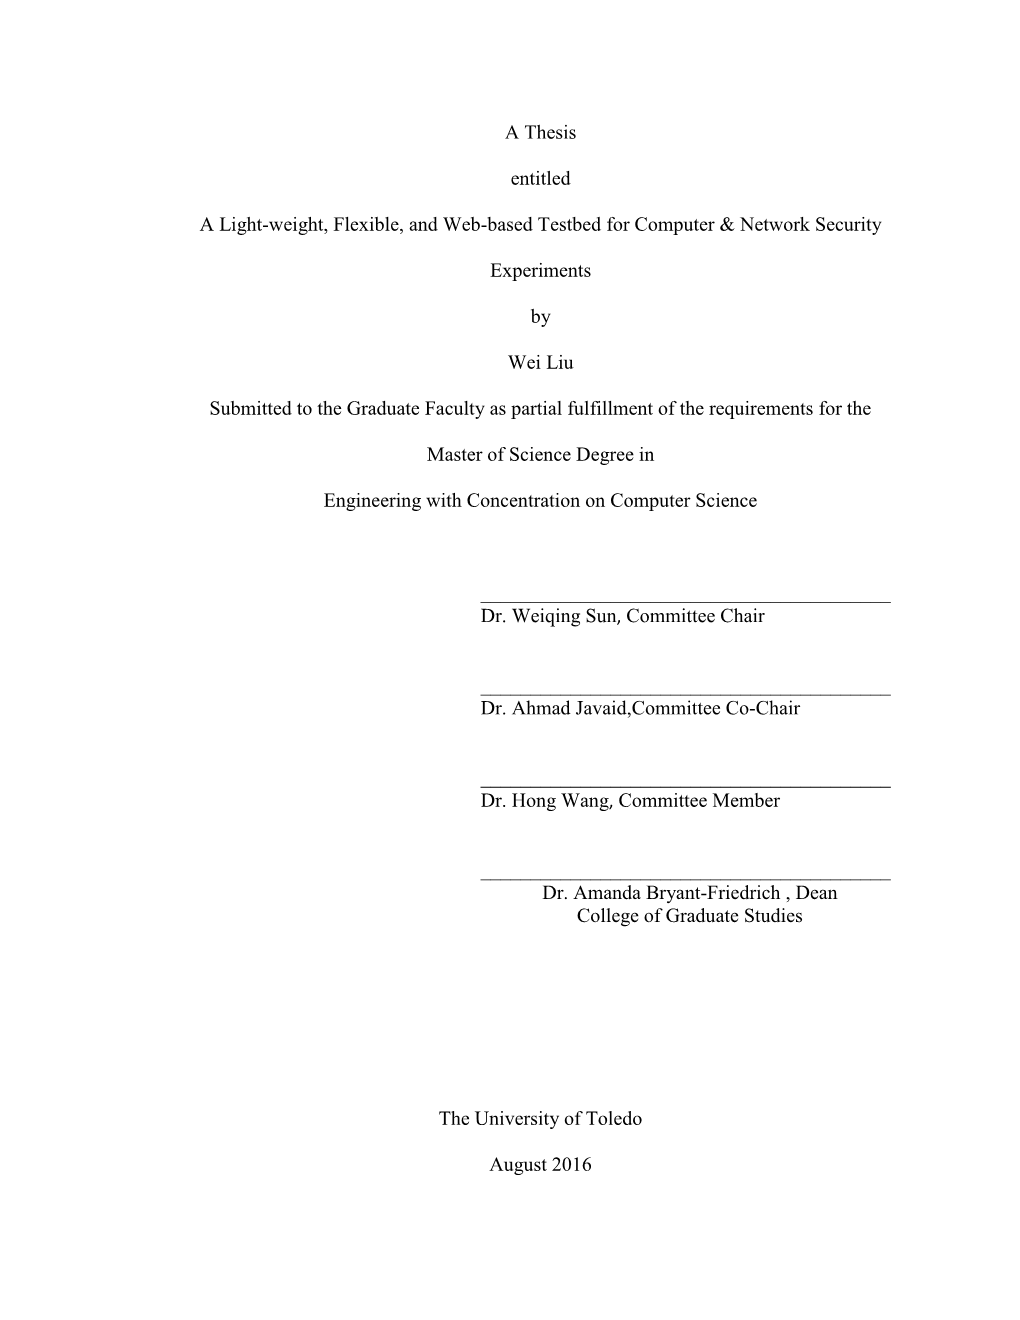 A Thesis Entitled a Light-Weight, Flexible, and Web-Based Testbed for Computer & Network Security Experiments by Wei Liu Su